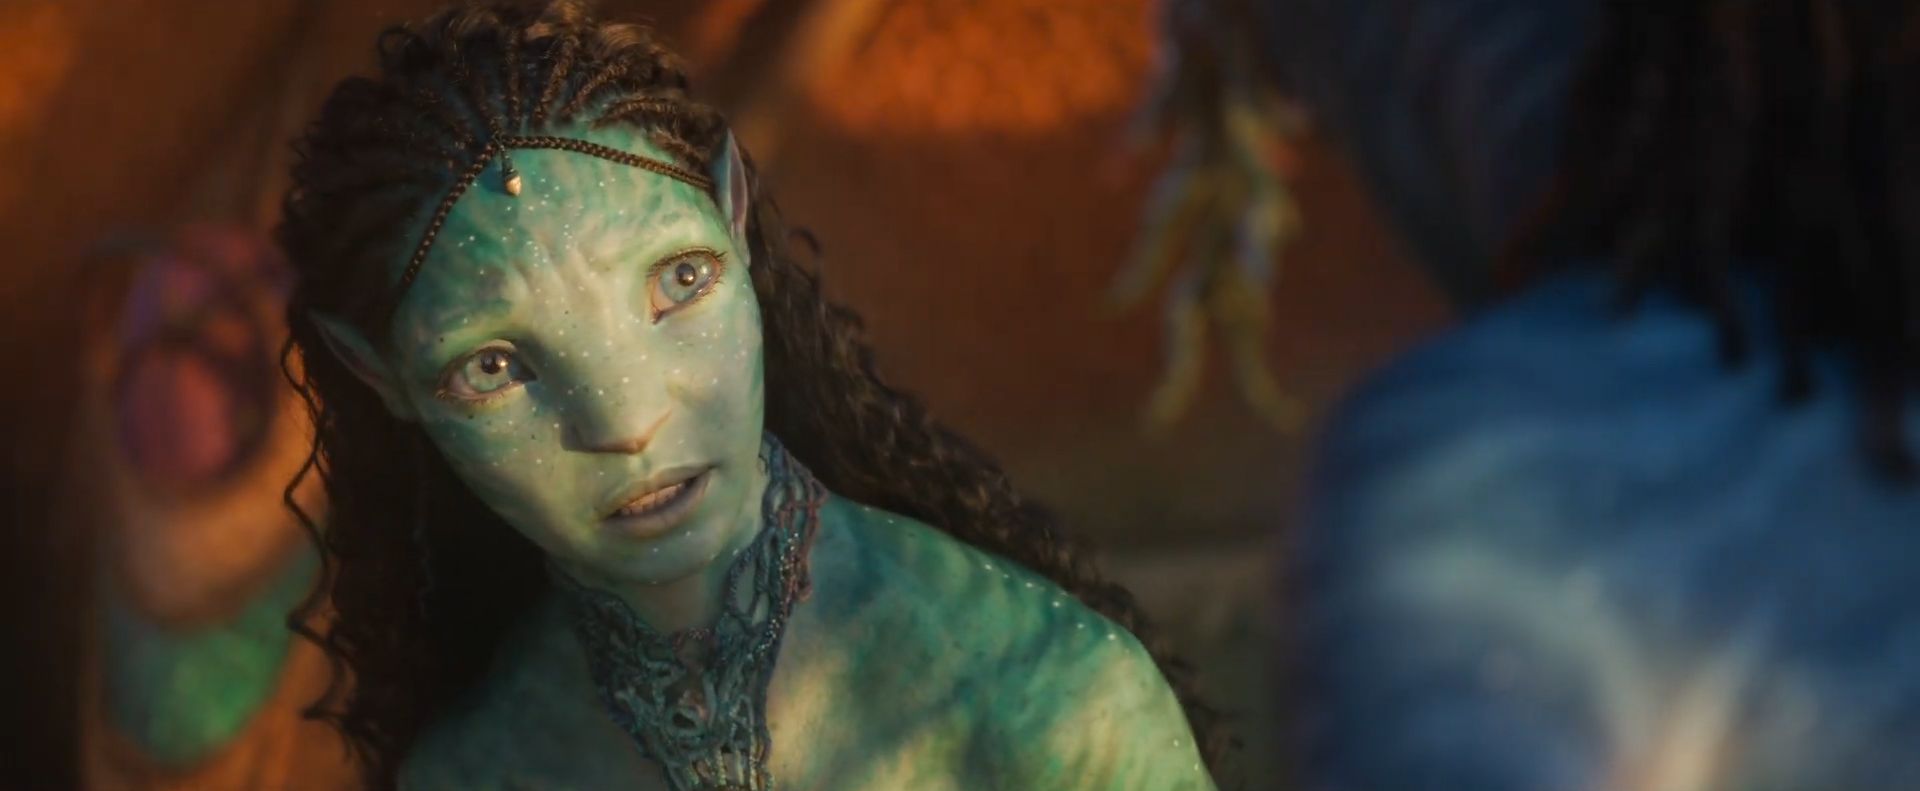 Avatar 2 OTT Release Date The Way of Water Online Platform Rights   Subscription  ReaderMaster